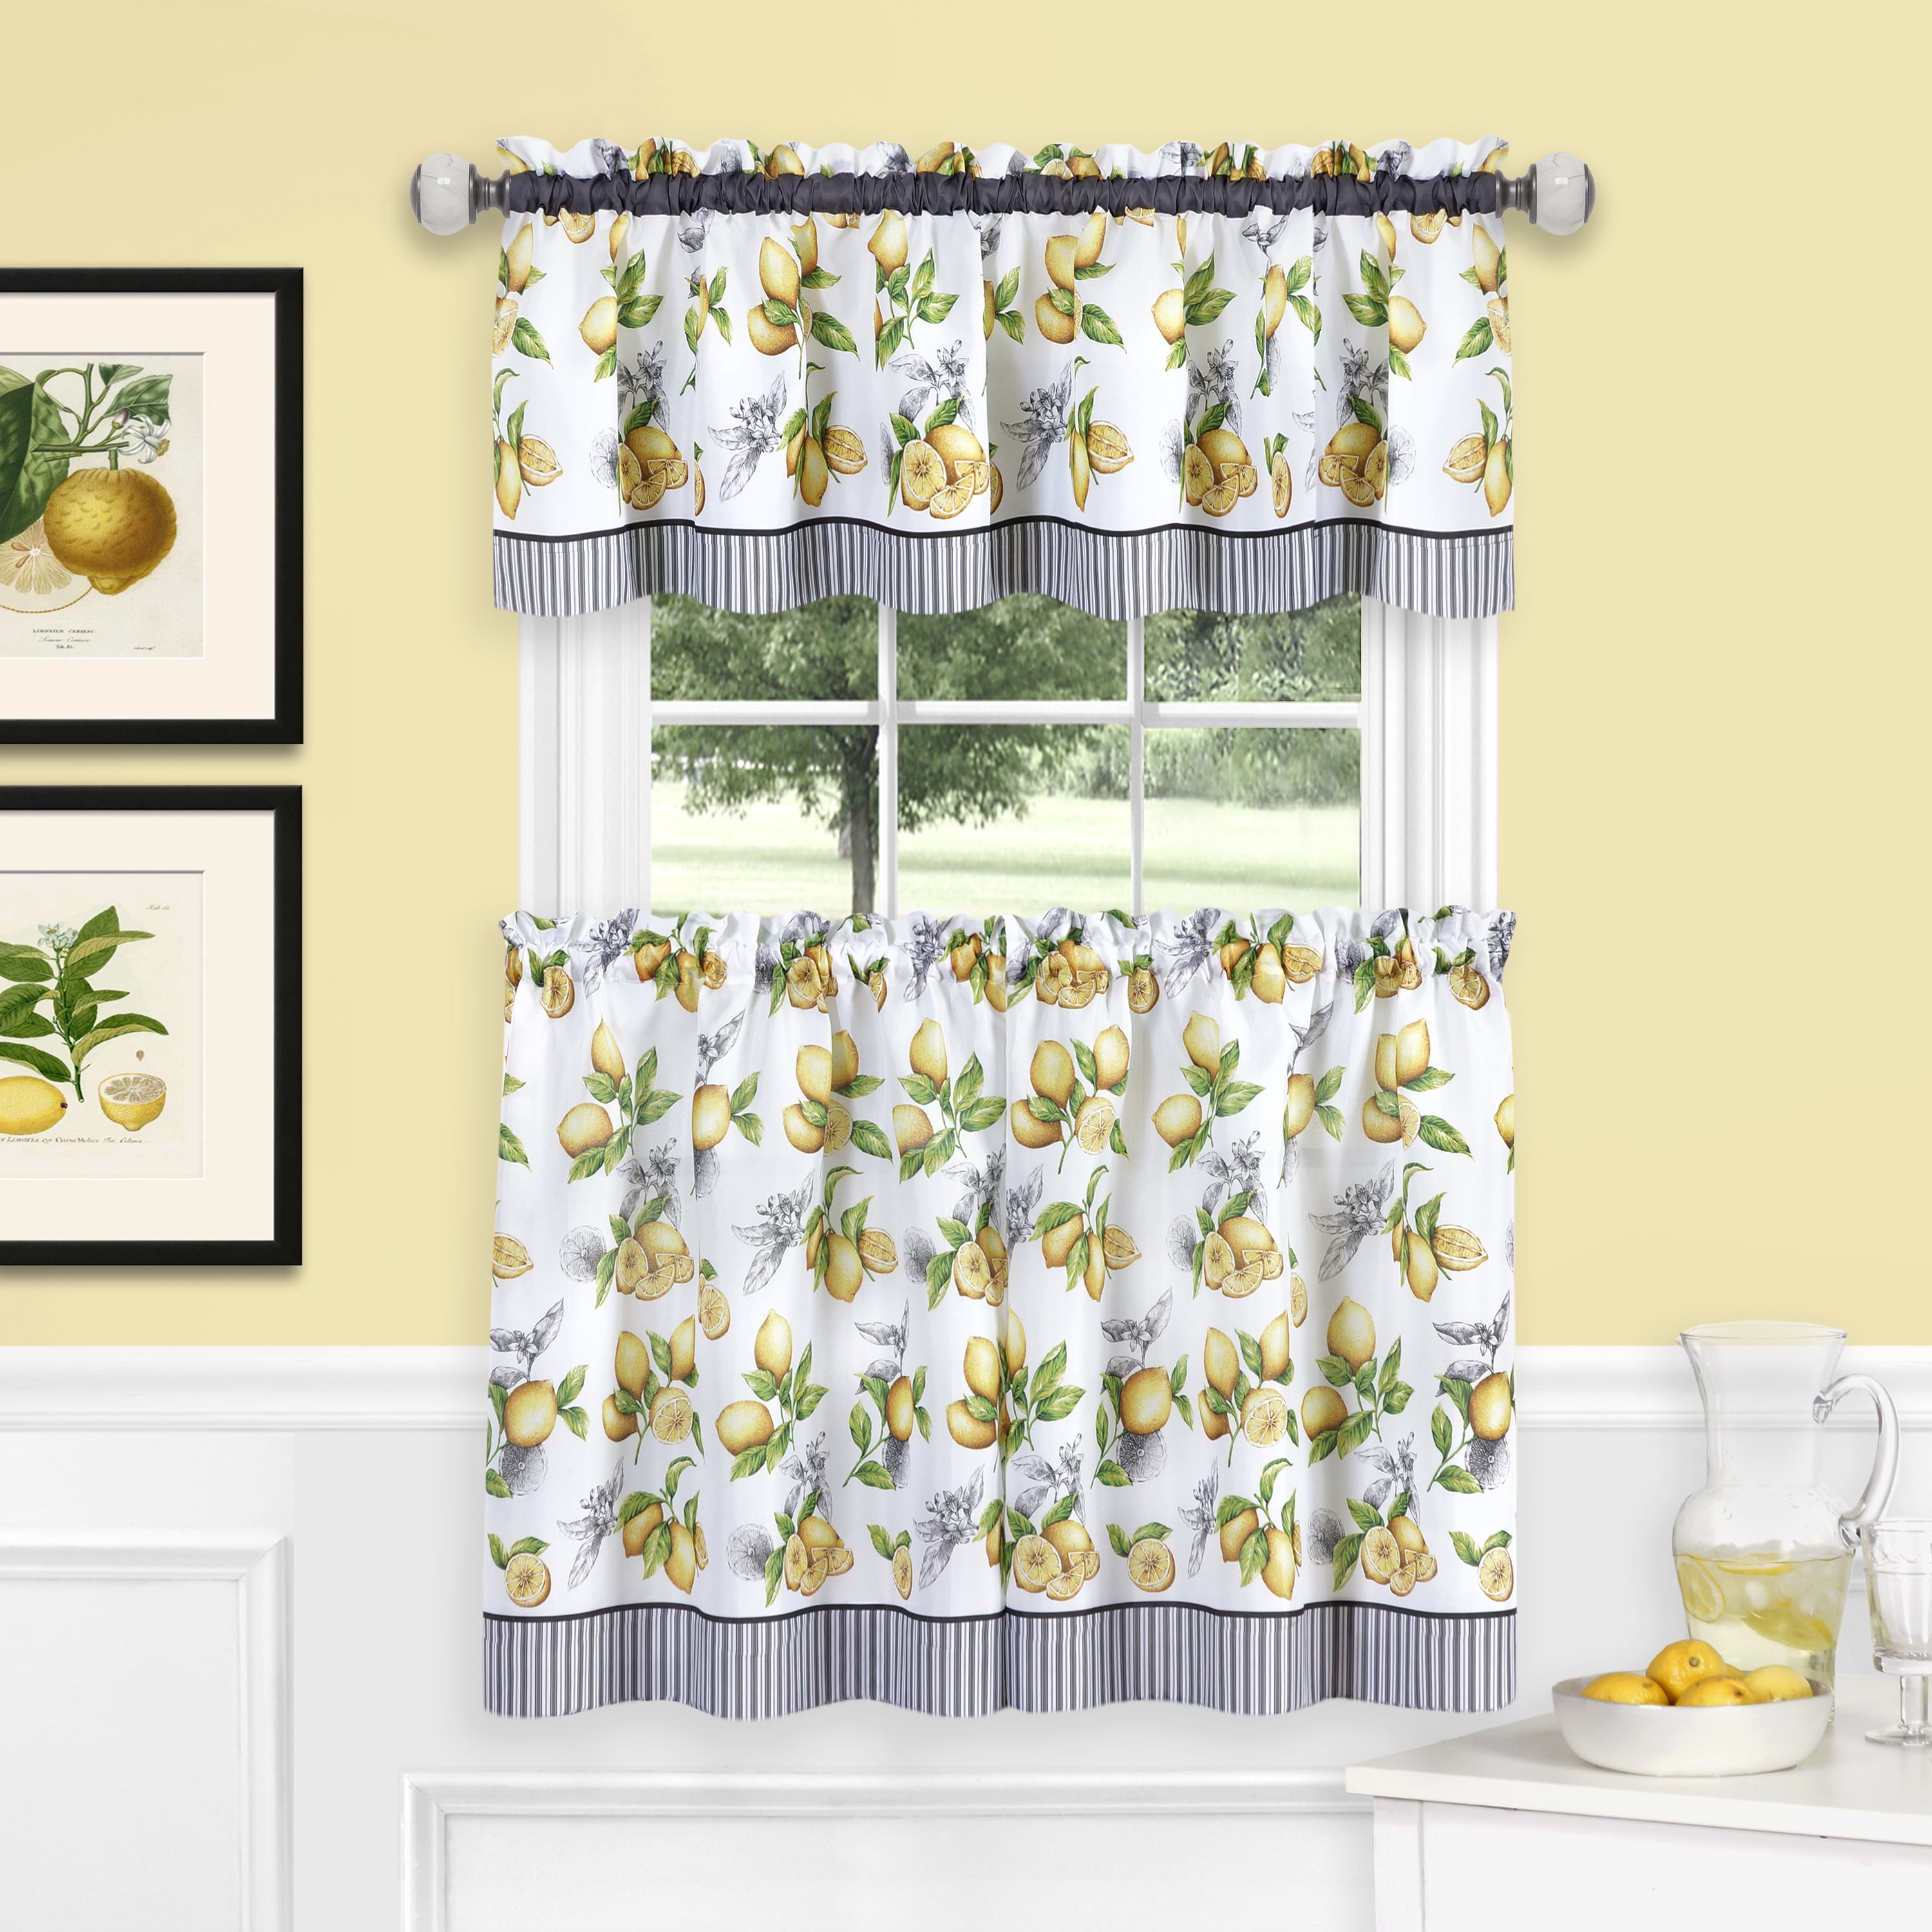 Lemons On Vine Complete Kitchen Curtain, Curtain Tier And Valance Set